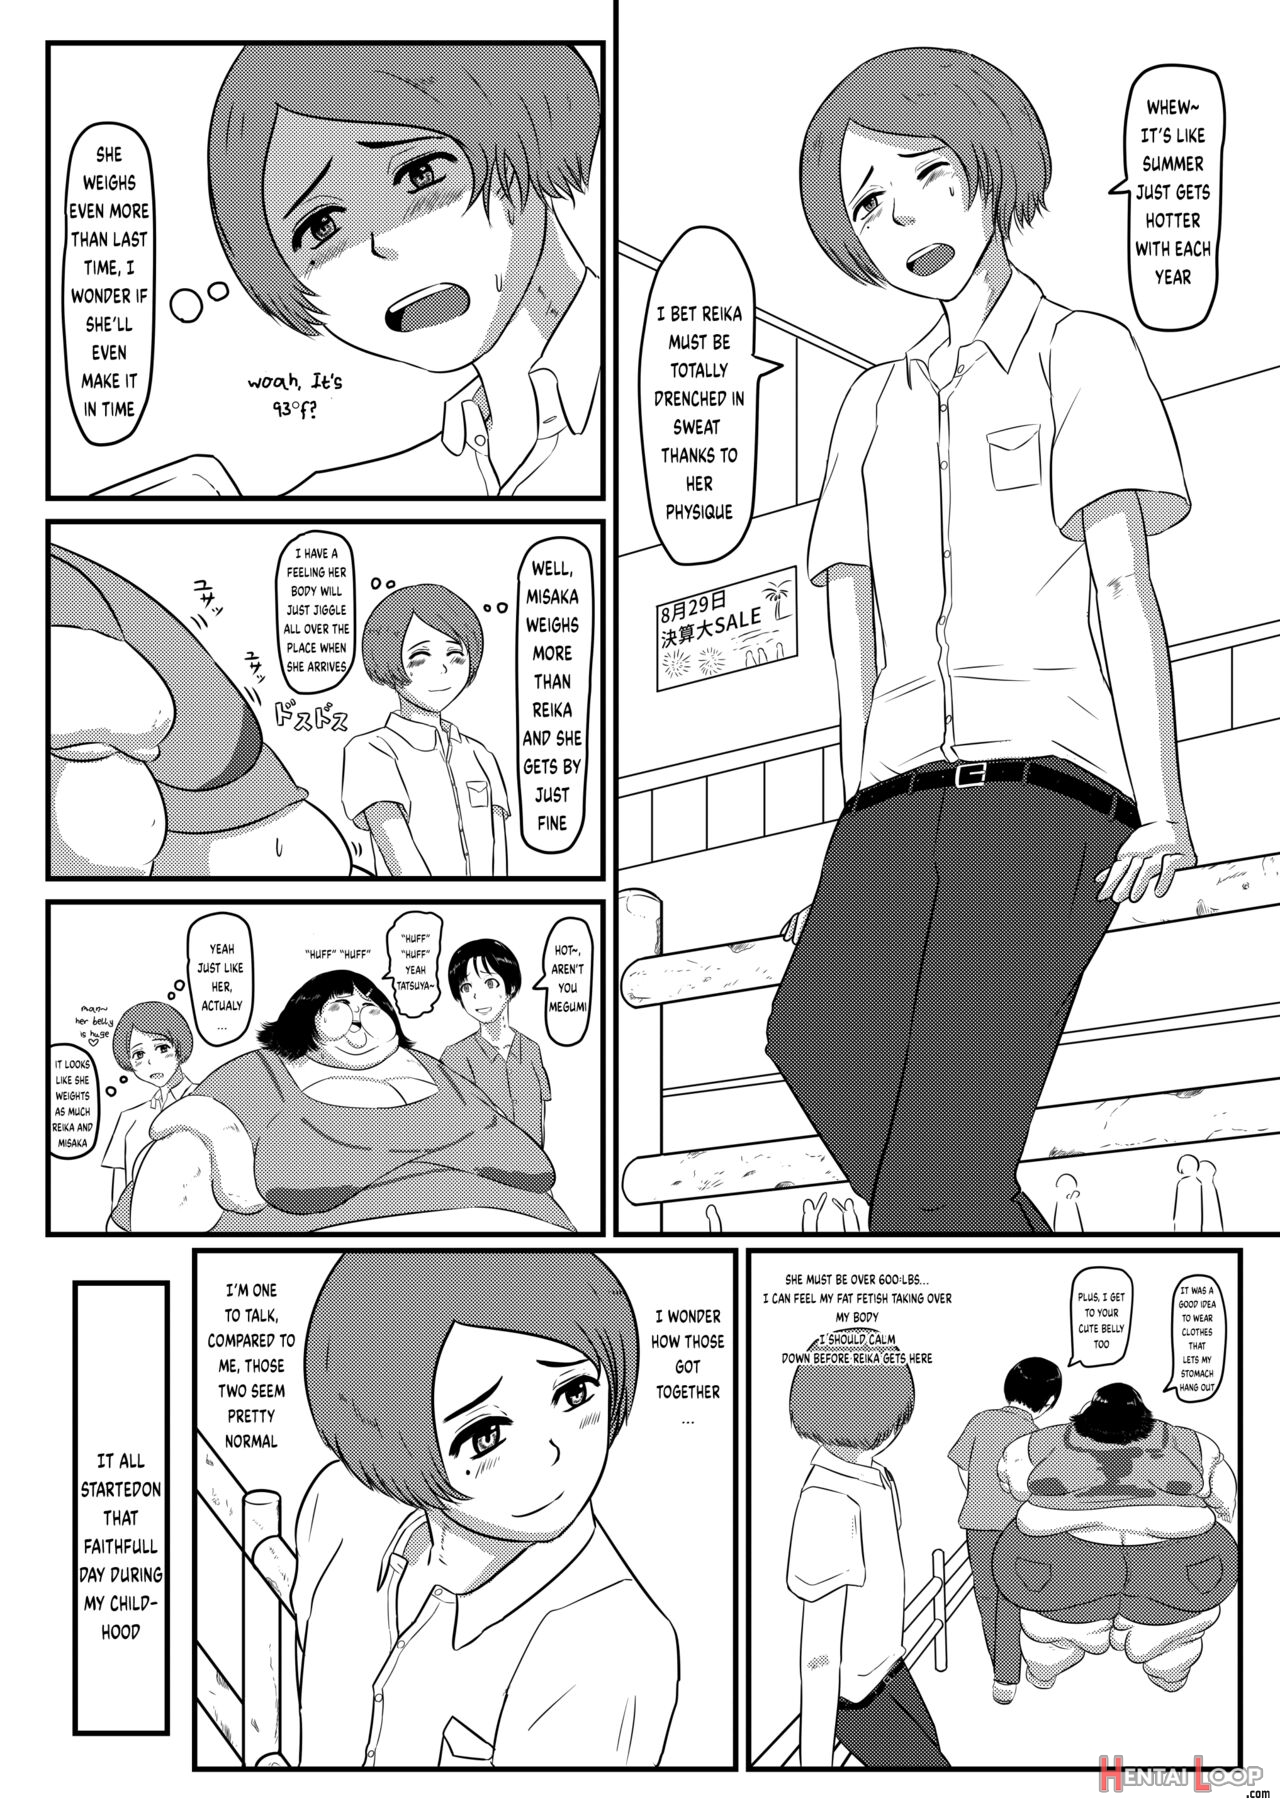 The Promise To Reach 1000lbs - English page 3